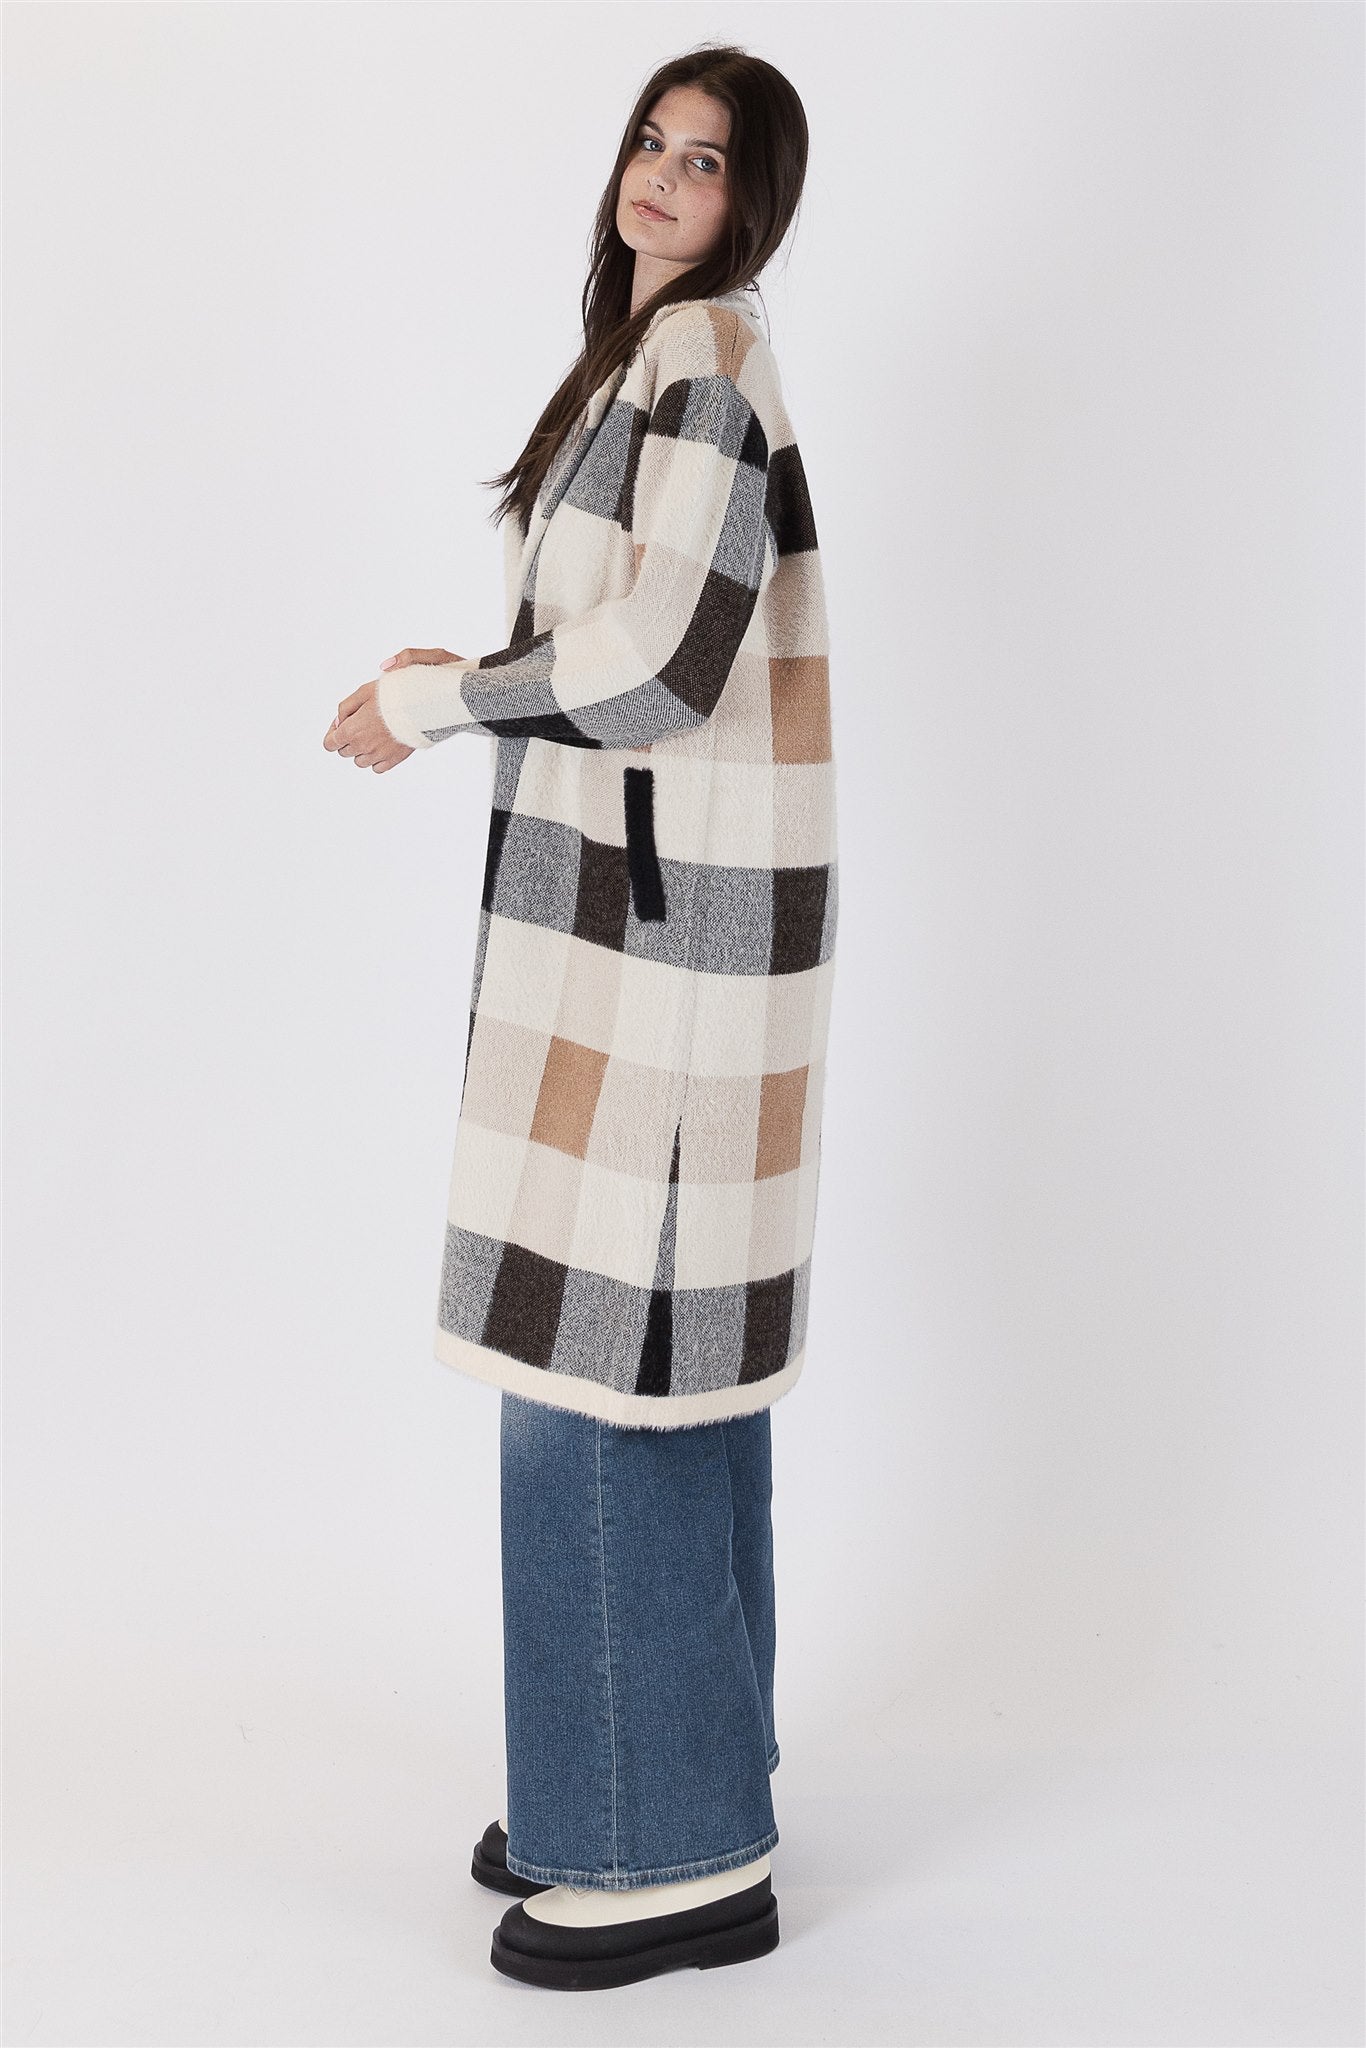 Lyla+Luxe Coat - William Check - Natural